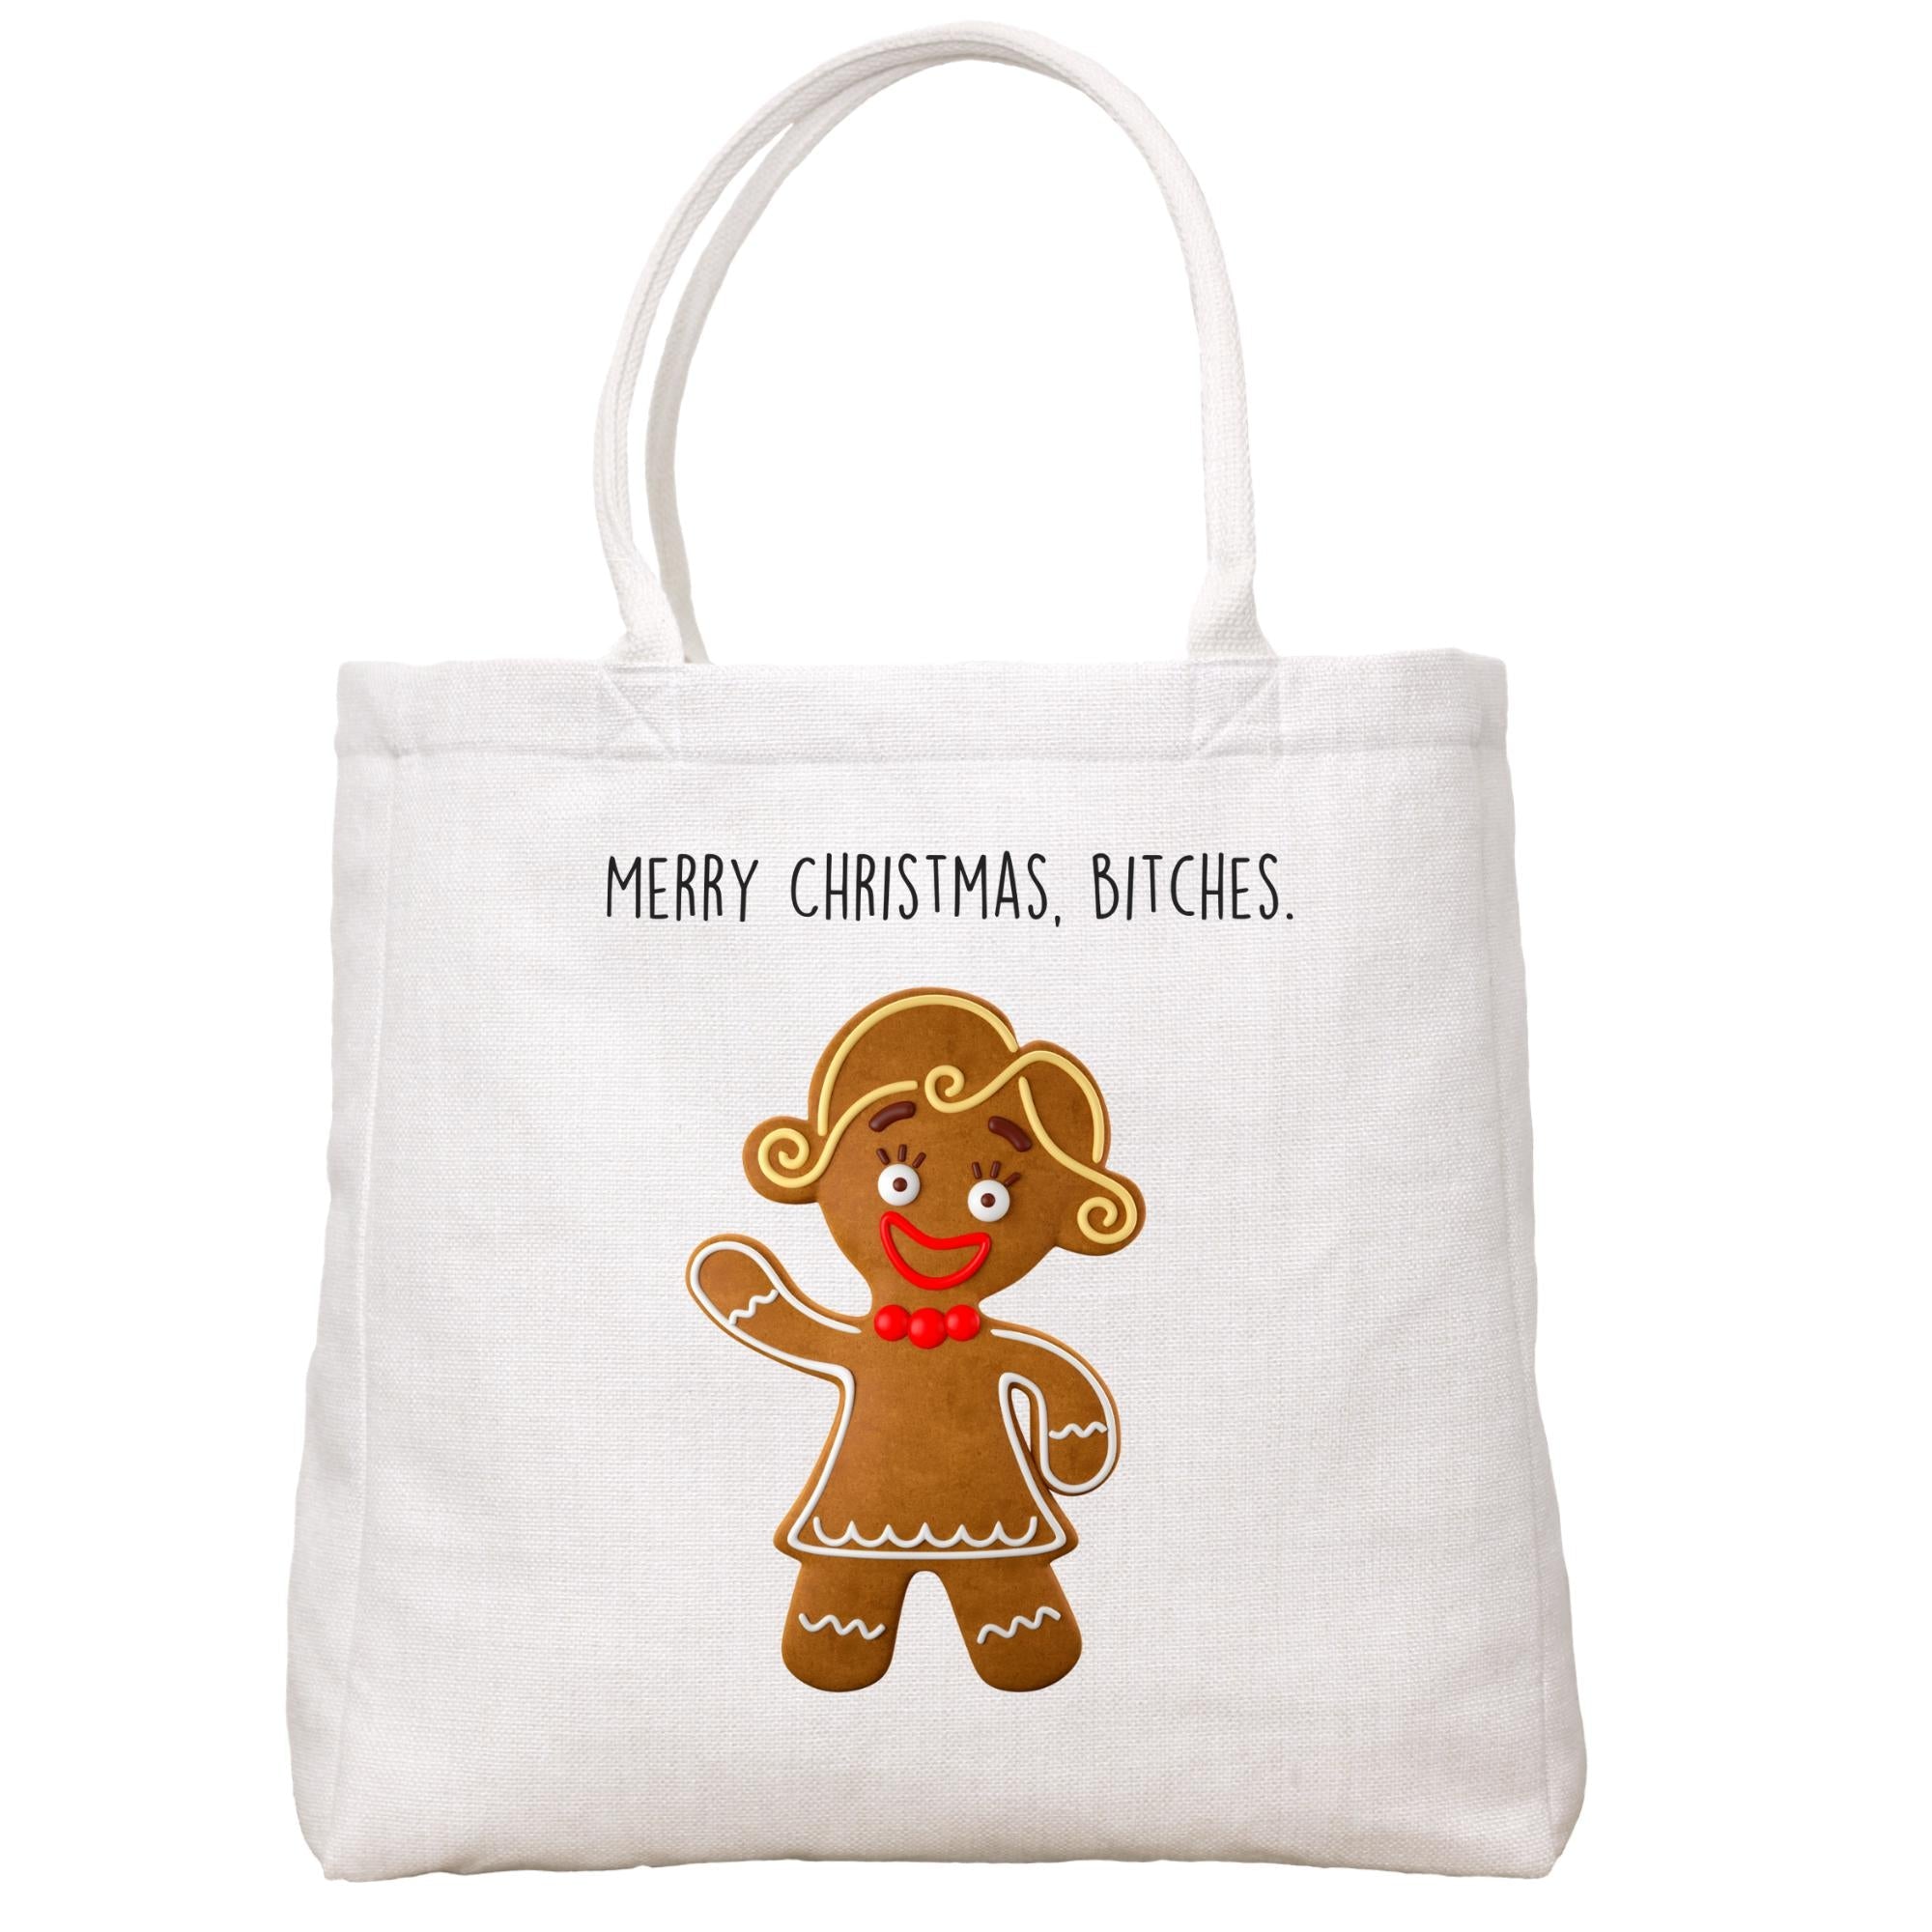 Merry Christmas B*tches Tote Bag Tote Bag - Southern Sisters